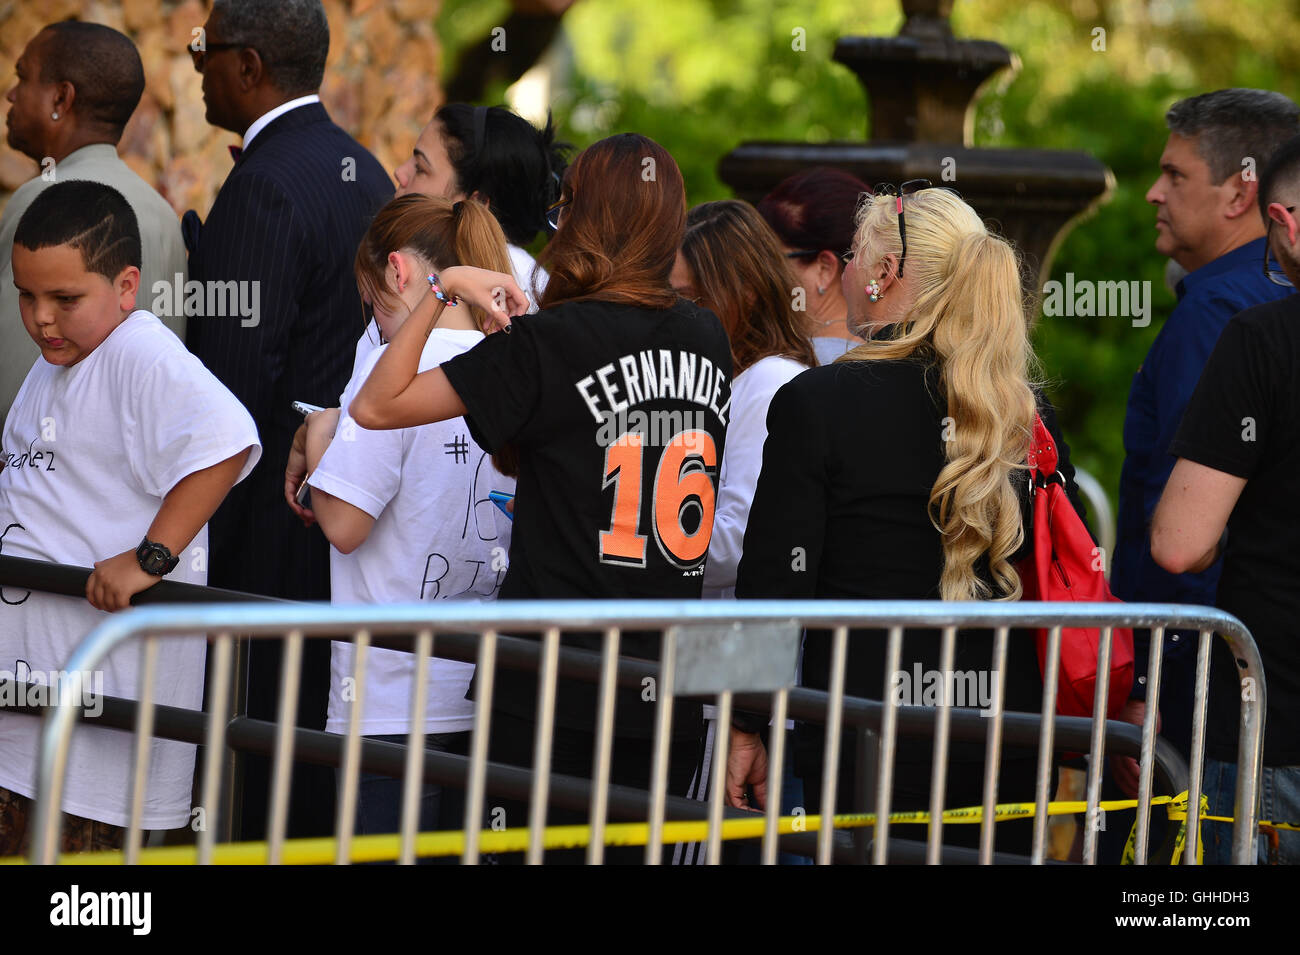 Miami, FL, USA. 28th Sep, 2016. Miami Marlins fans pay their respects to Miami Marlins pitcher Jose Fernandez (#16) during the public viewing at St. Brendan Catholic Church on September 28, 2016 in Miami, Florida. Mr. Fernandez was killed in a weekend boat crash in Miami Beach along with two friends. Credit:  Mpi10/Media Punch/Alamy Live News Stock Photo